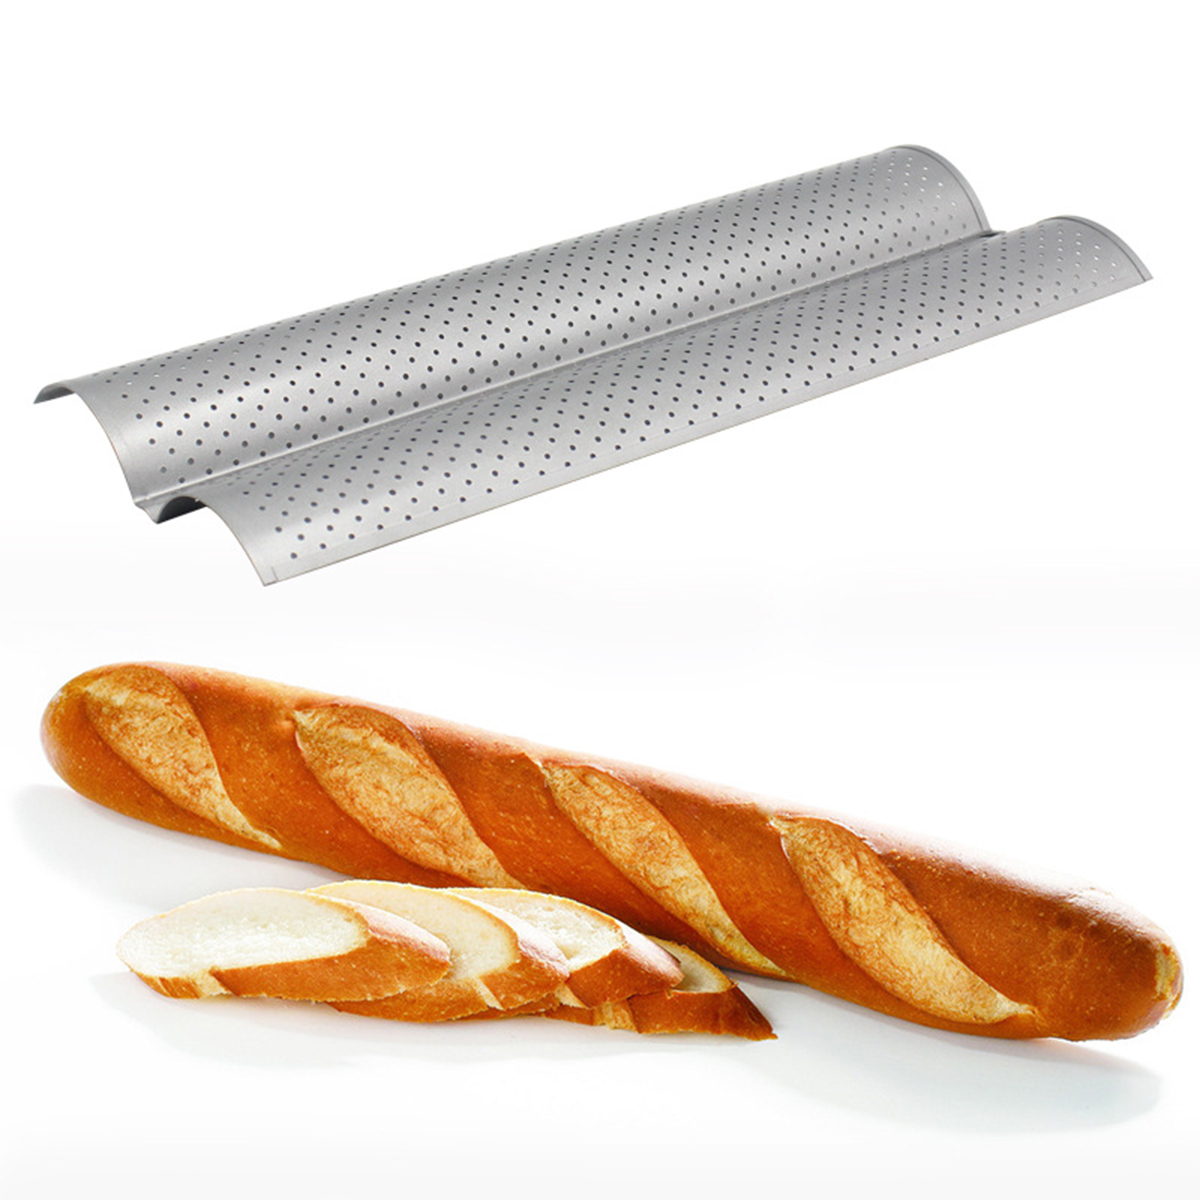 23-Grooves-Alloy-Non-Stick-French-Bread-Baking-Tray-Baguette-Pan-Tin-Tray-Bakeware-Mold-1393436-6